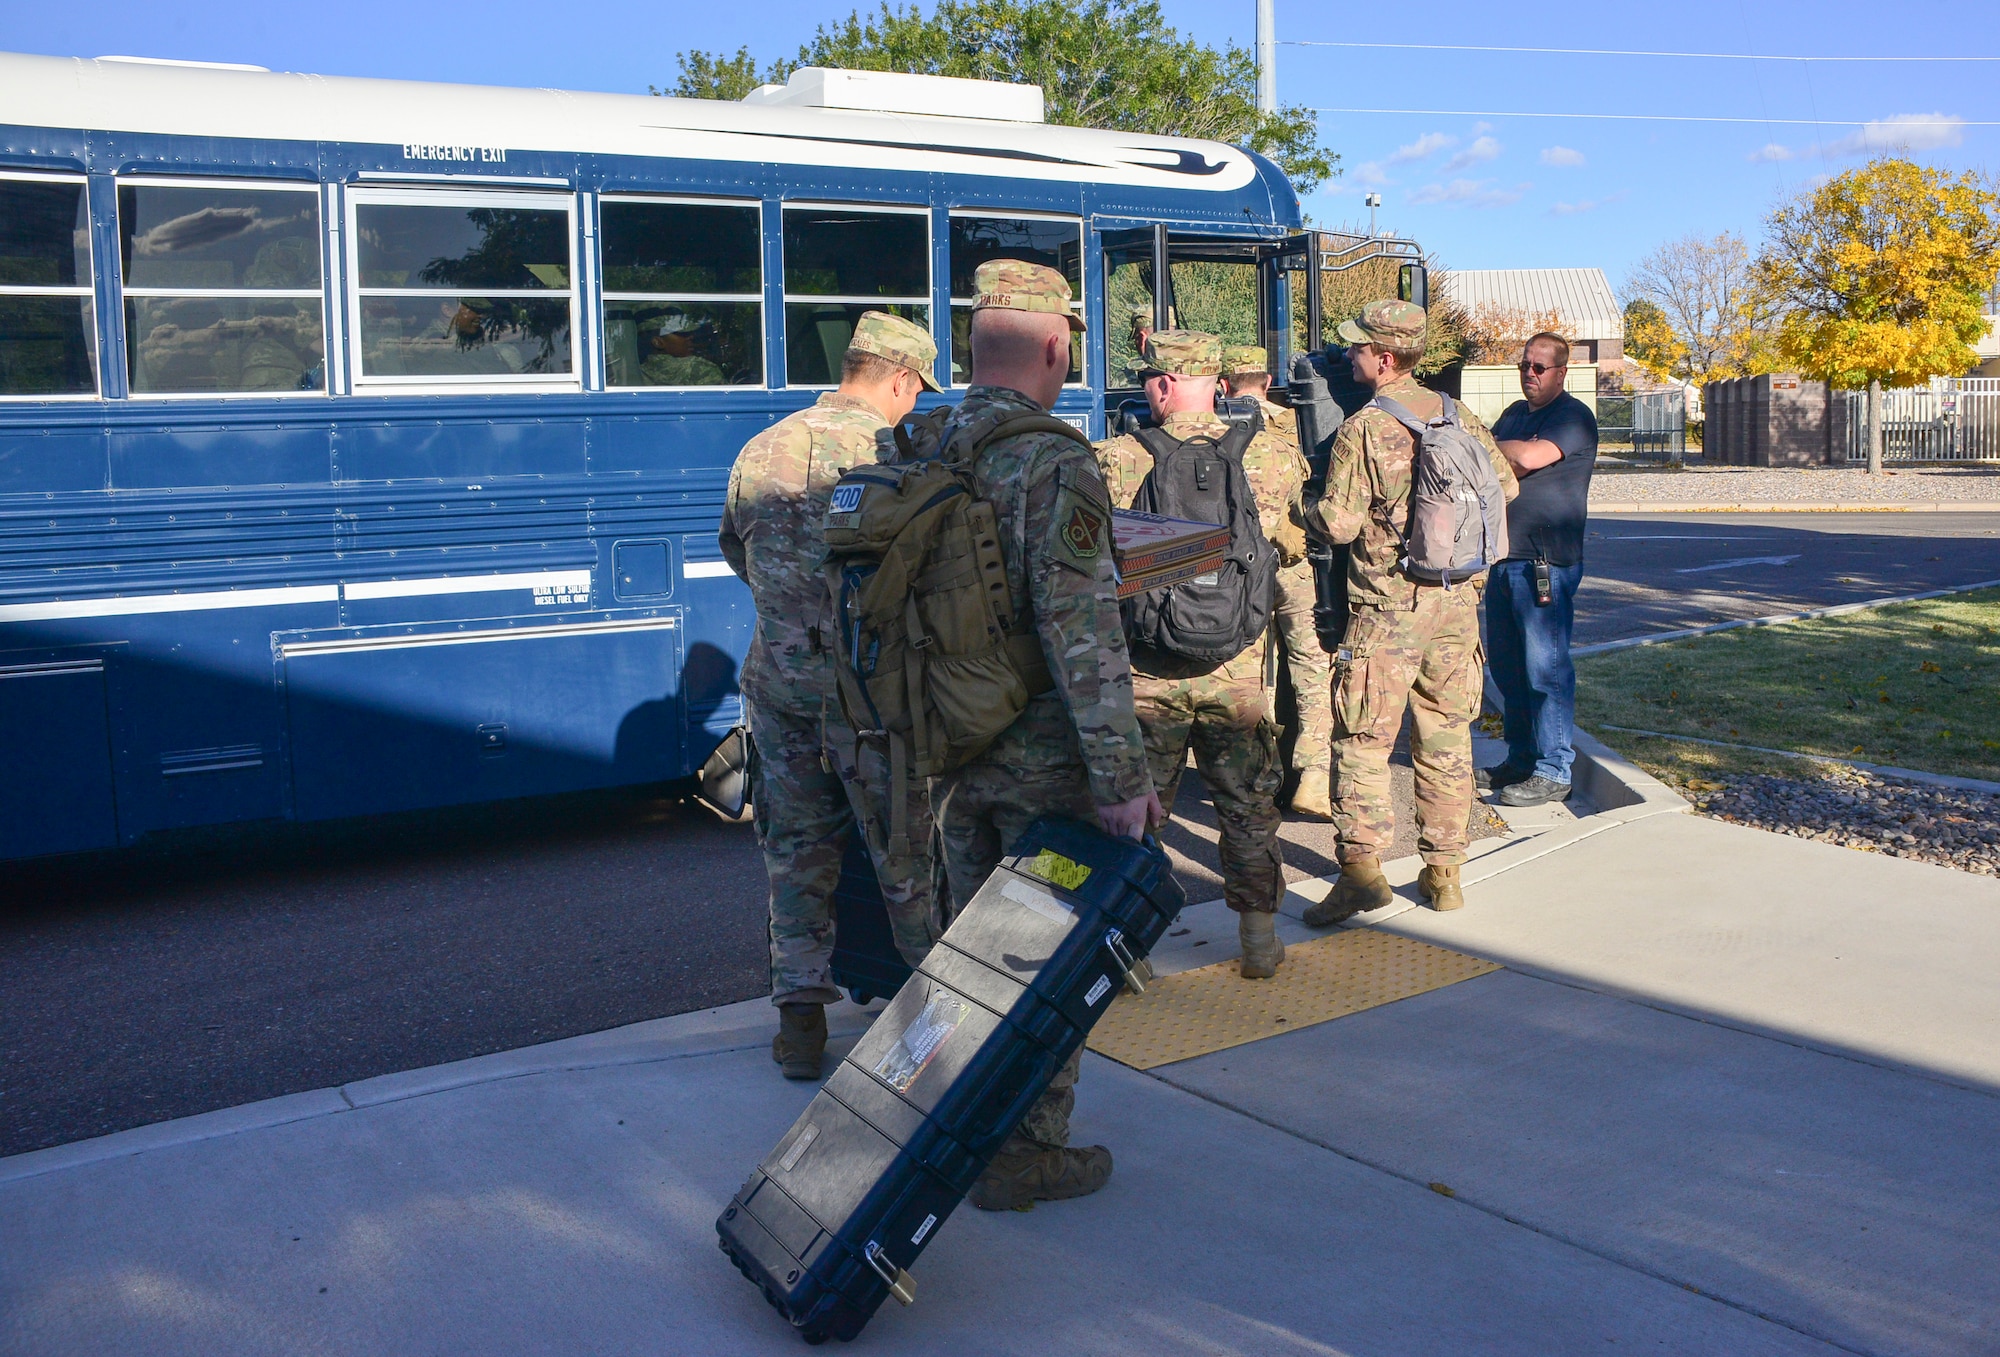 Members of Team Kirtland load onto the bus to deploy during exercise Global Thunder 20 at Kirtland Air Force Base, N.M., Oct. 24, 2019. Global Thunder is an annual nuclear command and control exercise that provides training opportunities for all of U.S. Strategic Command’s mission areas, tests joint and field training operations, and has a specific focus on nuclear readiness. (U.S. Air Force photo by Staff Sgt. Kimberly Nagle)